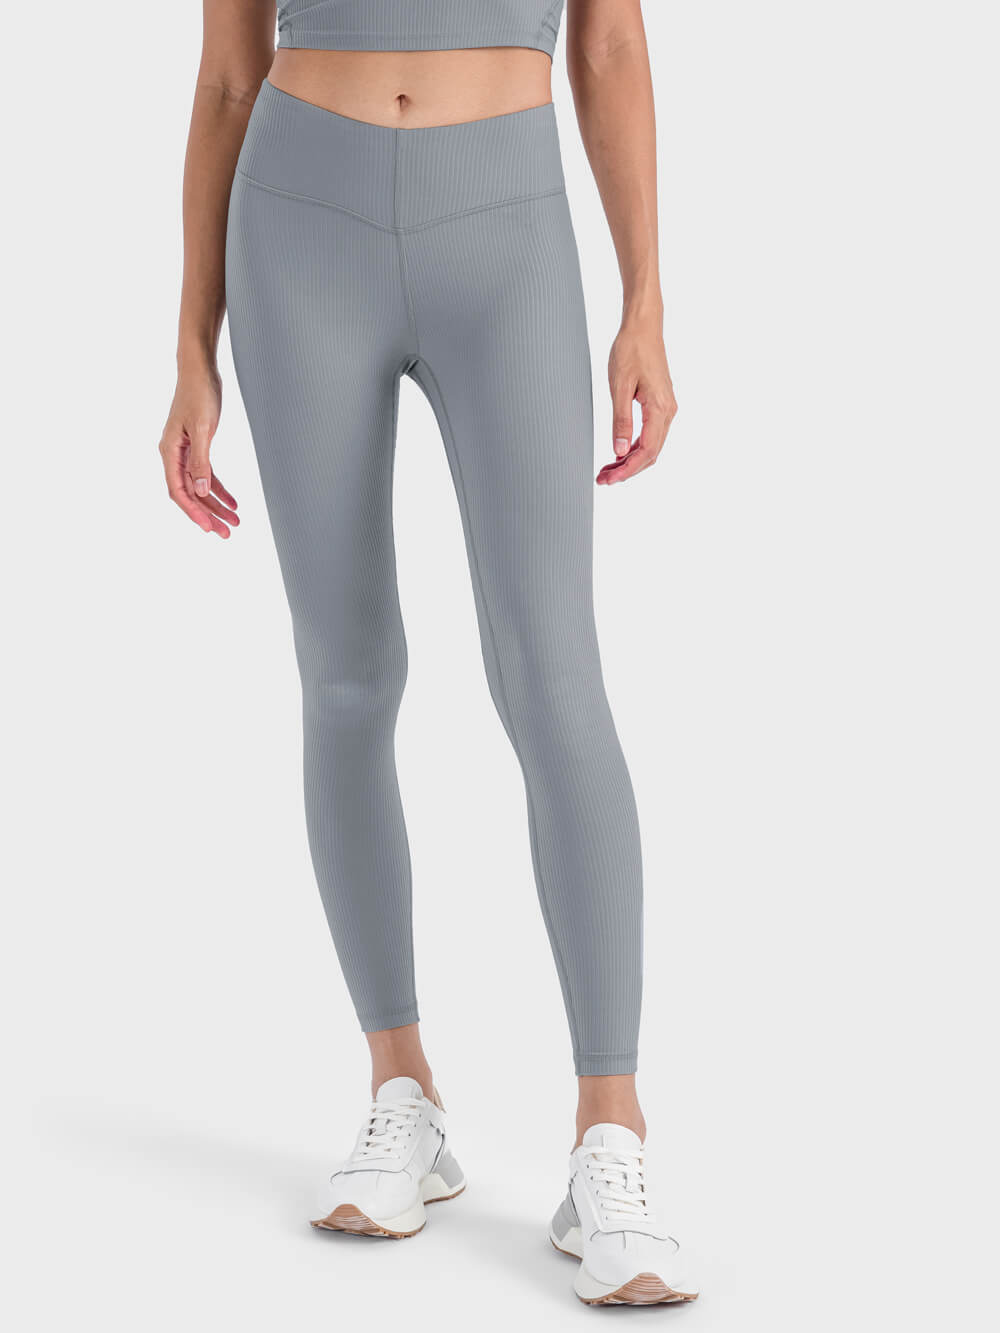 Pants & Leggings – Nepoagym Official Store